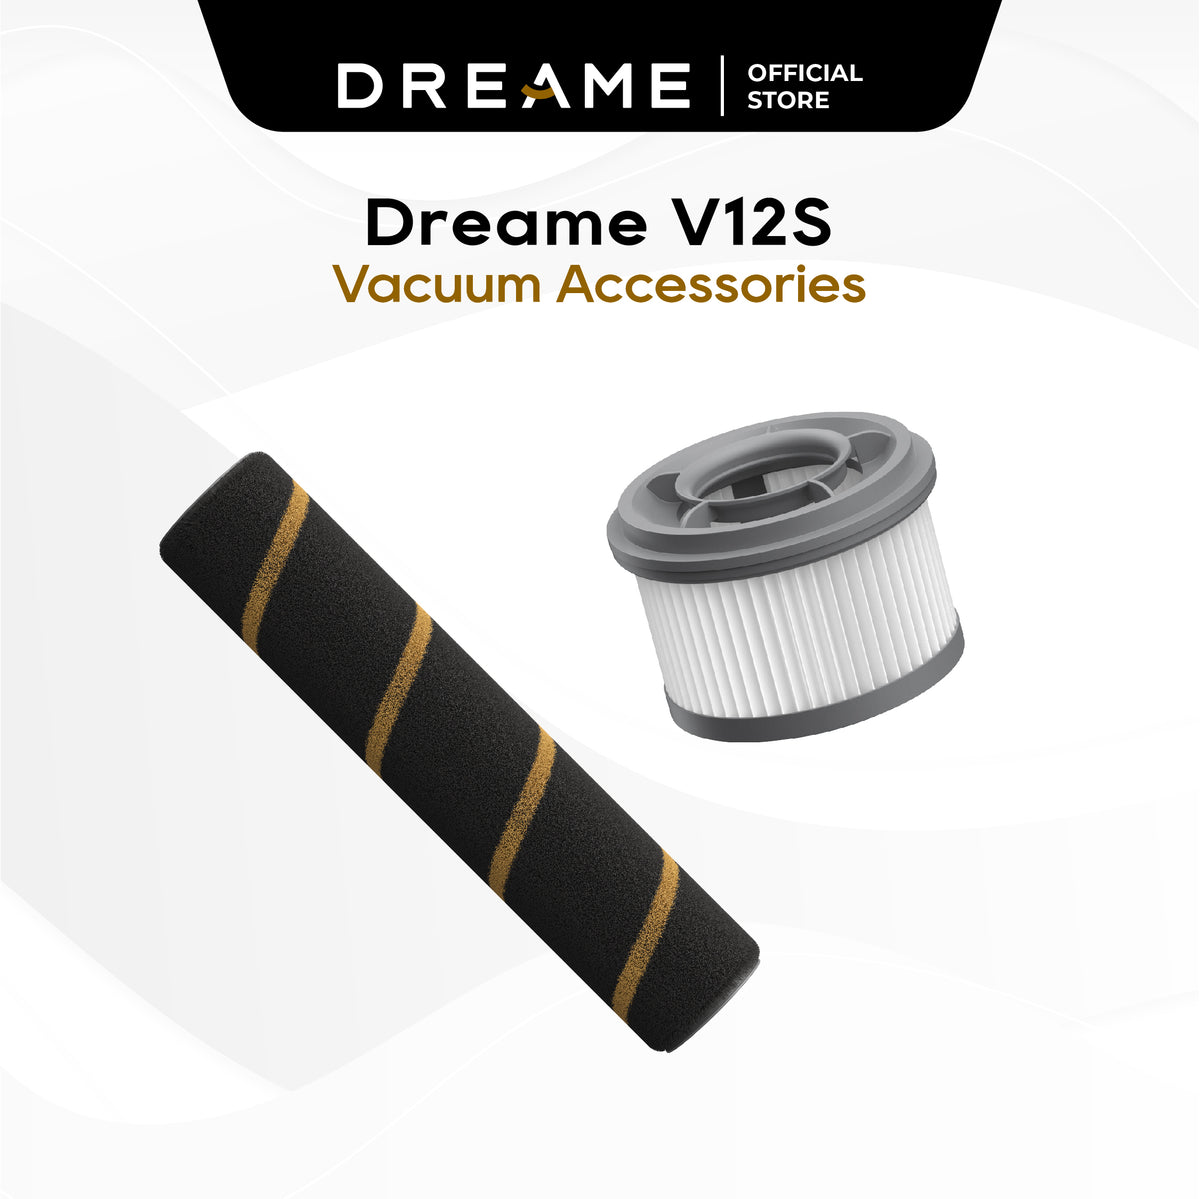 Dreame V12S Cordless Stick Vacuum Cleaner Accessories | Hepa Filter, Roller Brush Replacement